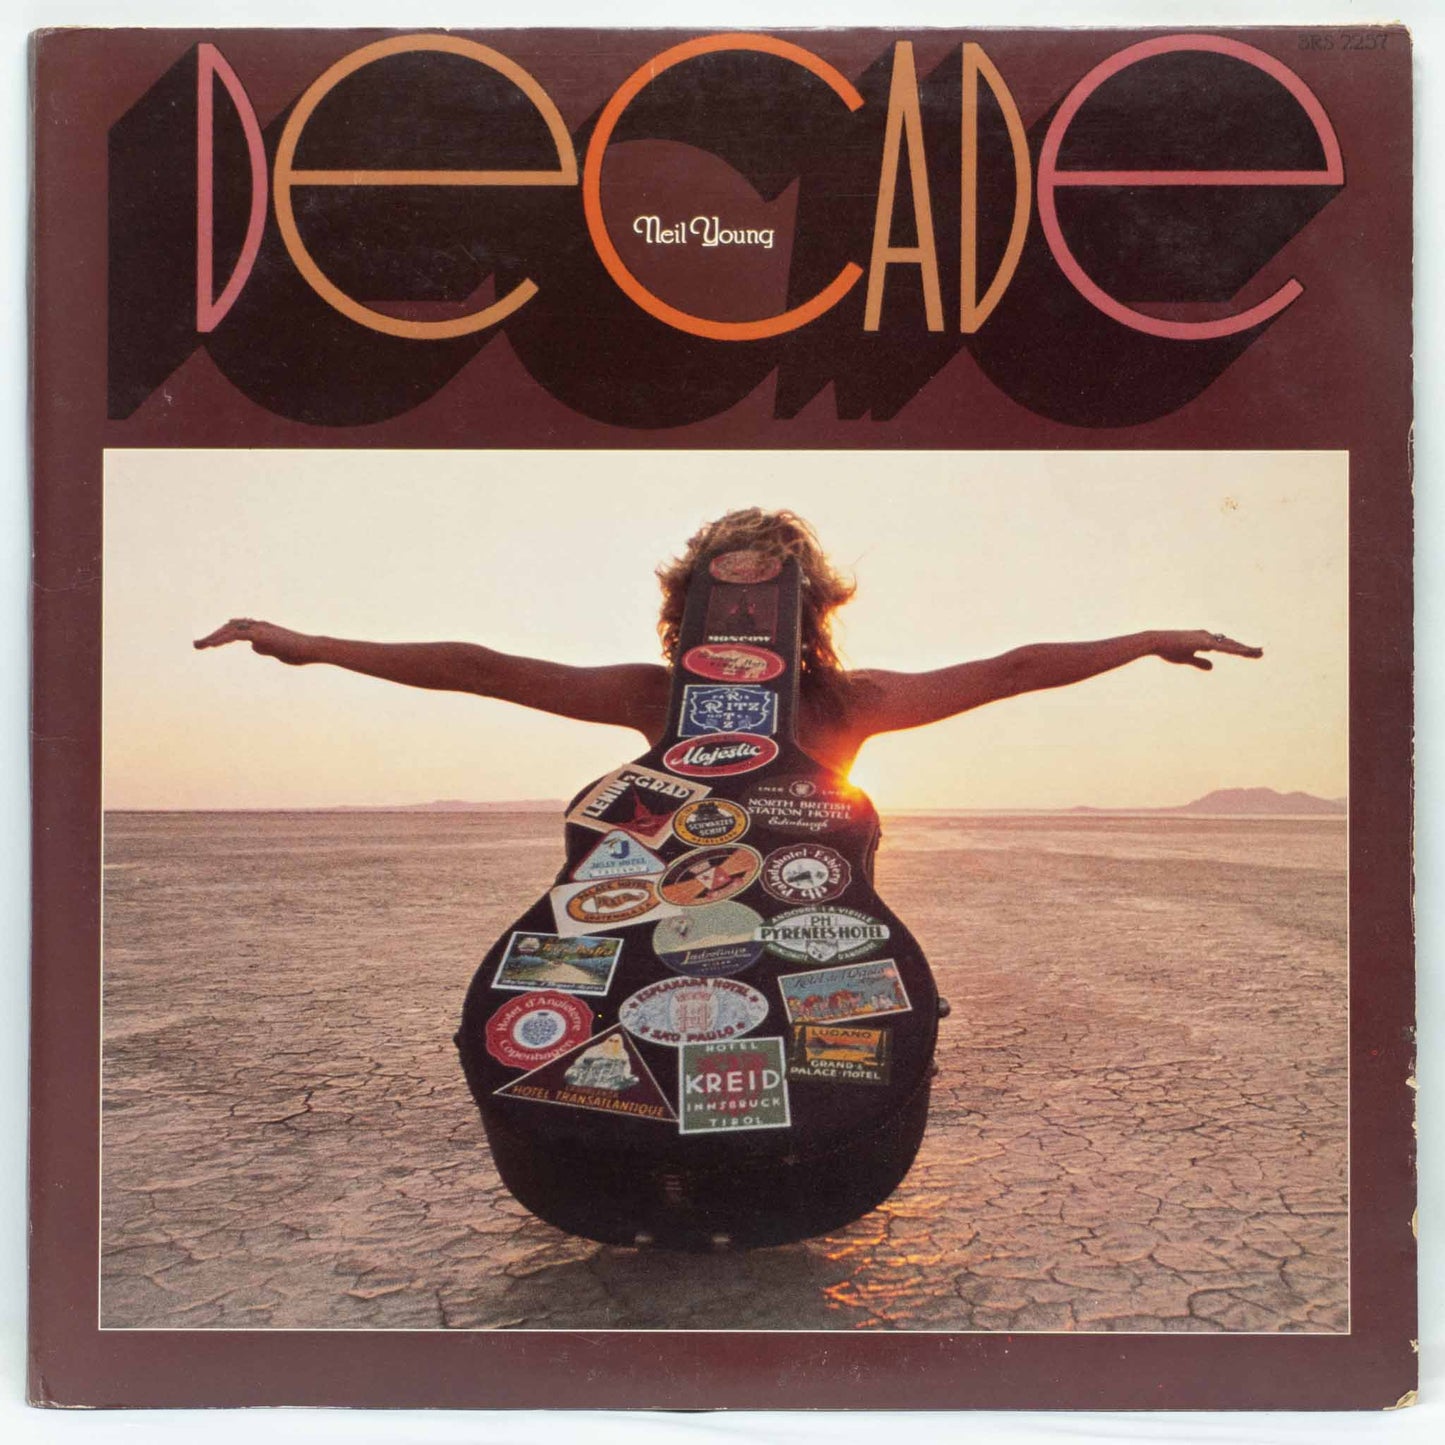 Neil Young ‎– Decade